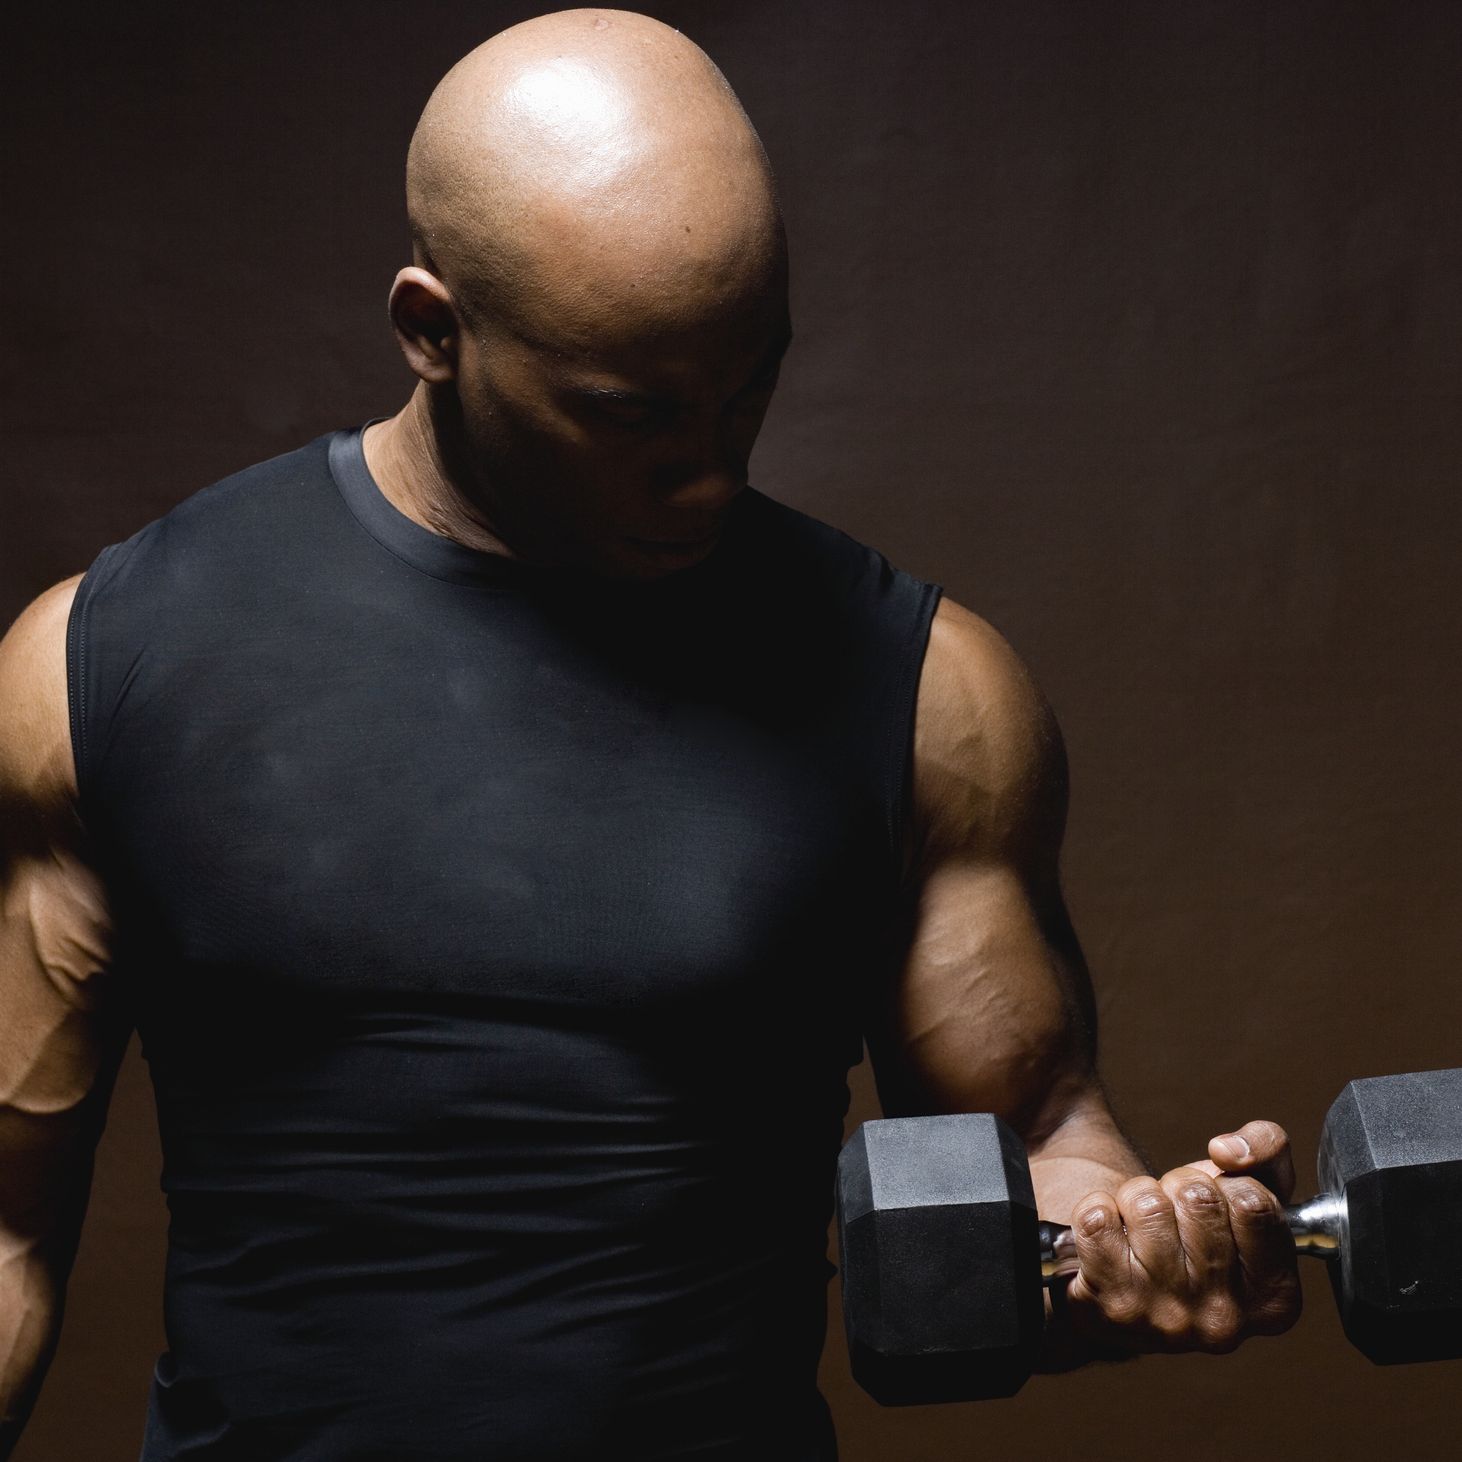 Men Over 40 Should Use This Curl Variation for Big Arms and Healthy Shoulders